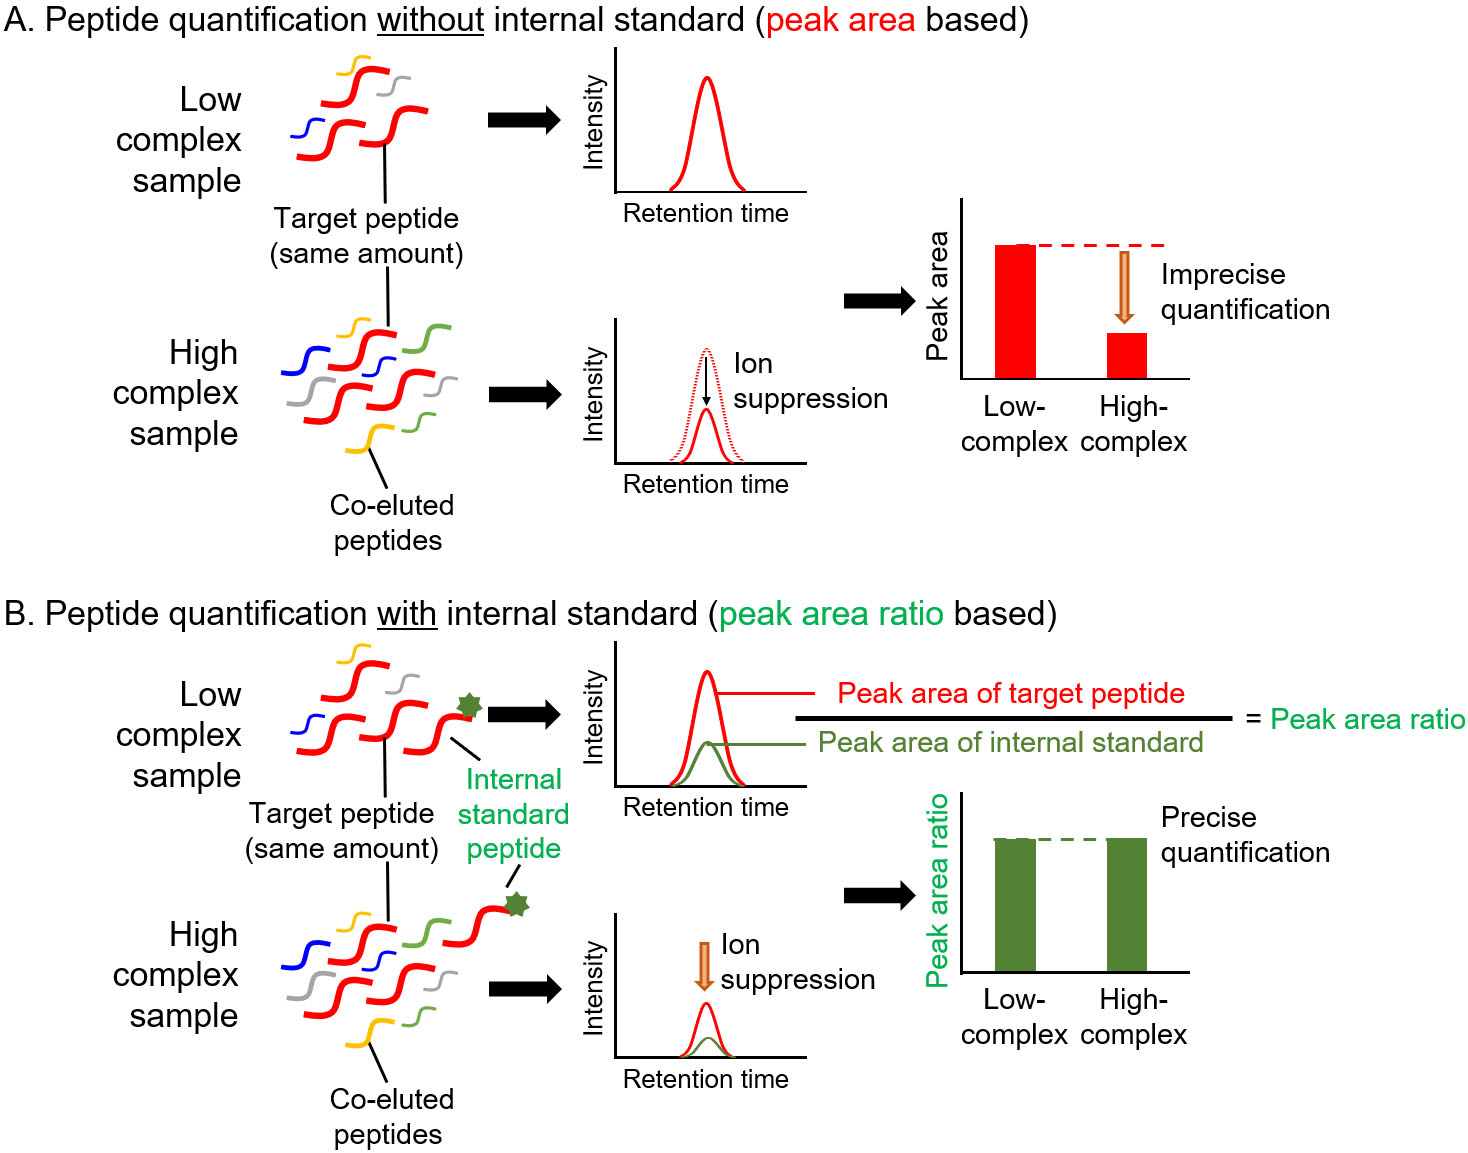 Precise quantification of peptides with internal standard in targeted proteomics. A. Peptide quantification without internal standard. Low- and high-complex samples contain the same amount of target peptide. Due to the ion suppression effect, the amount of target peptide in high-complex sample is underestimated when the amount was determined based on the peak area. B. Peptide quantification using internal standard. In high-complex samples, ion suppression occurs at same degree on target peptide and internal standard peptide. Therefore, the peak area ratio of target peptide to internal standard peptide in a high-complex sample is same as that in a low-complex sample.